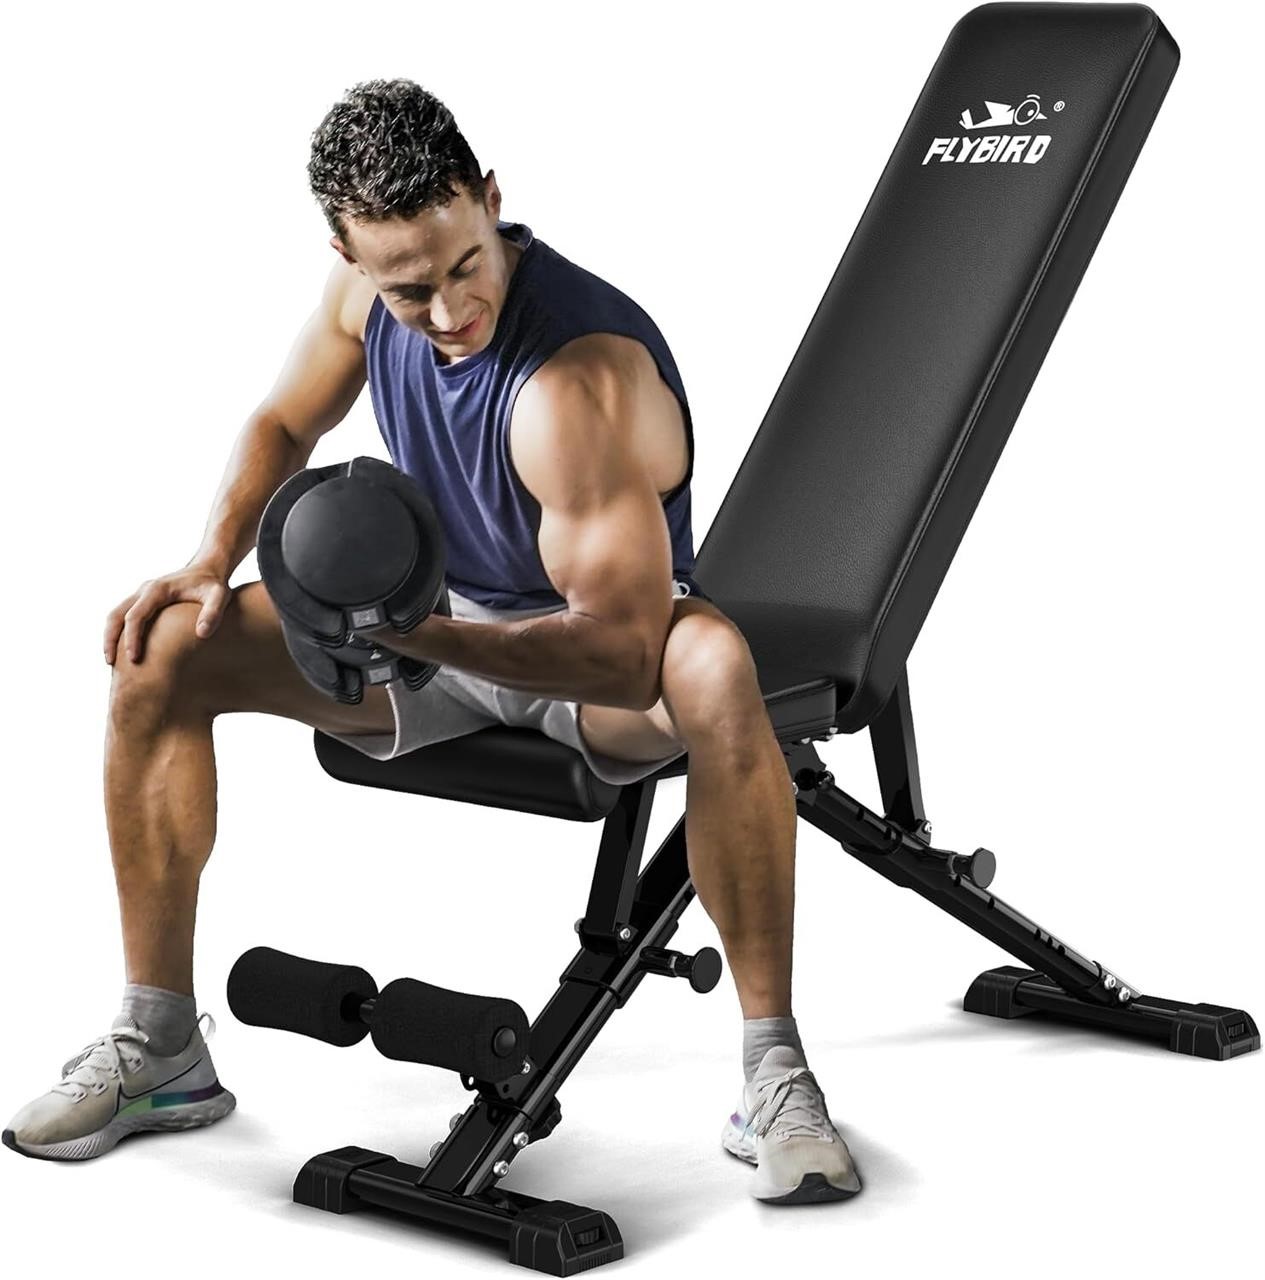 FLYBIRD Adjustable Workout Bench